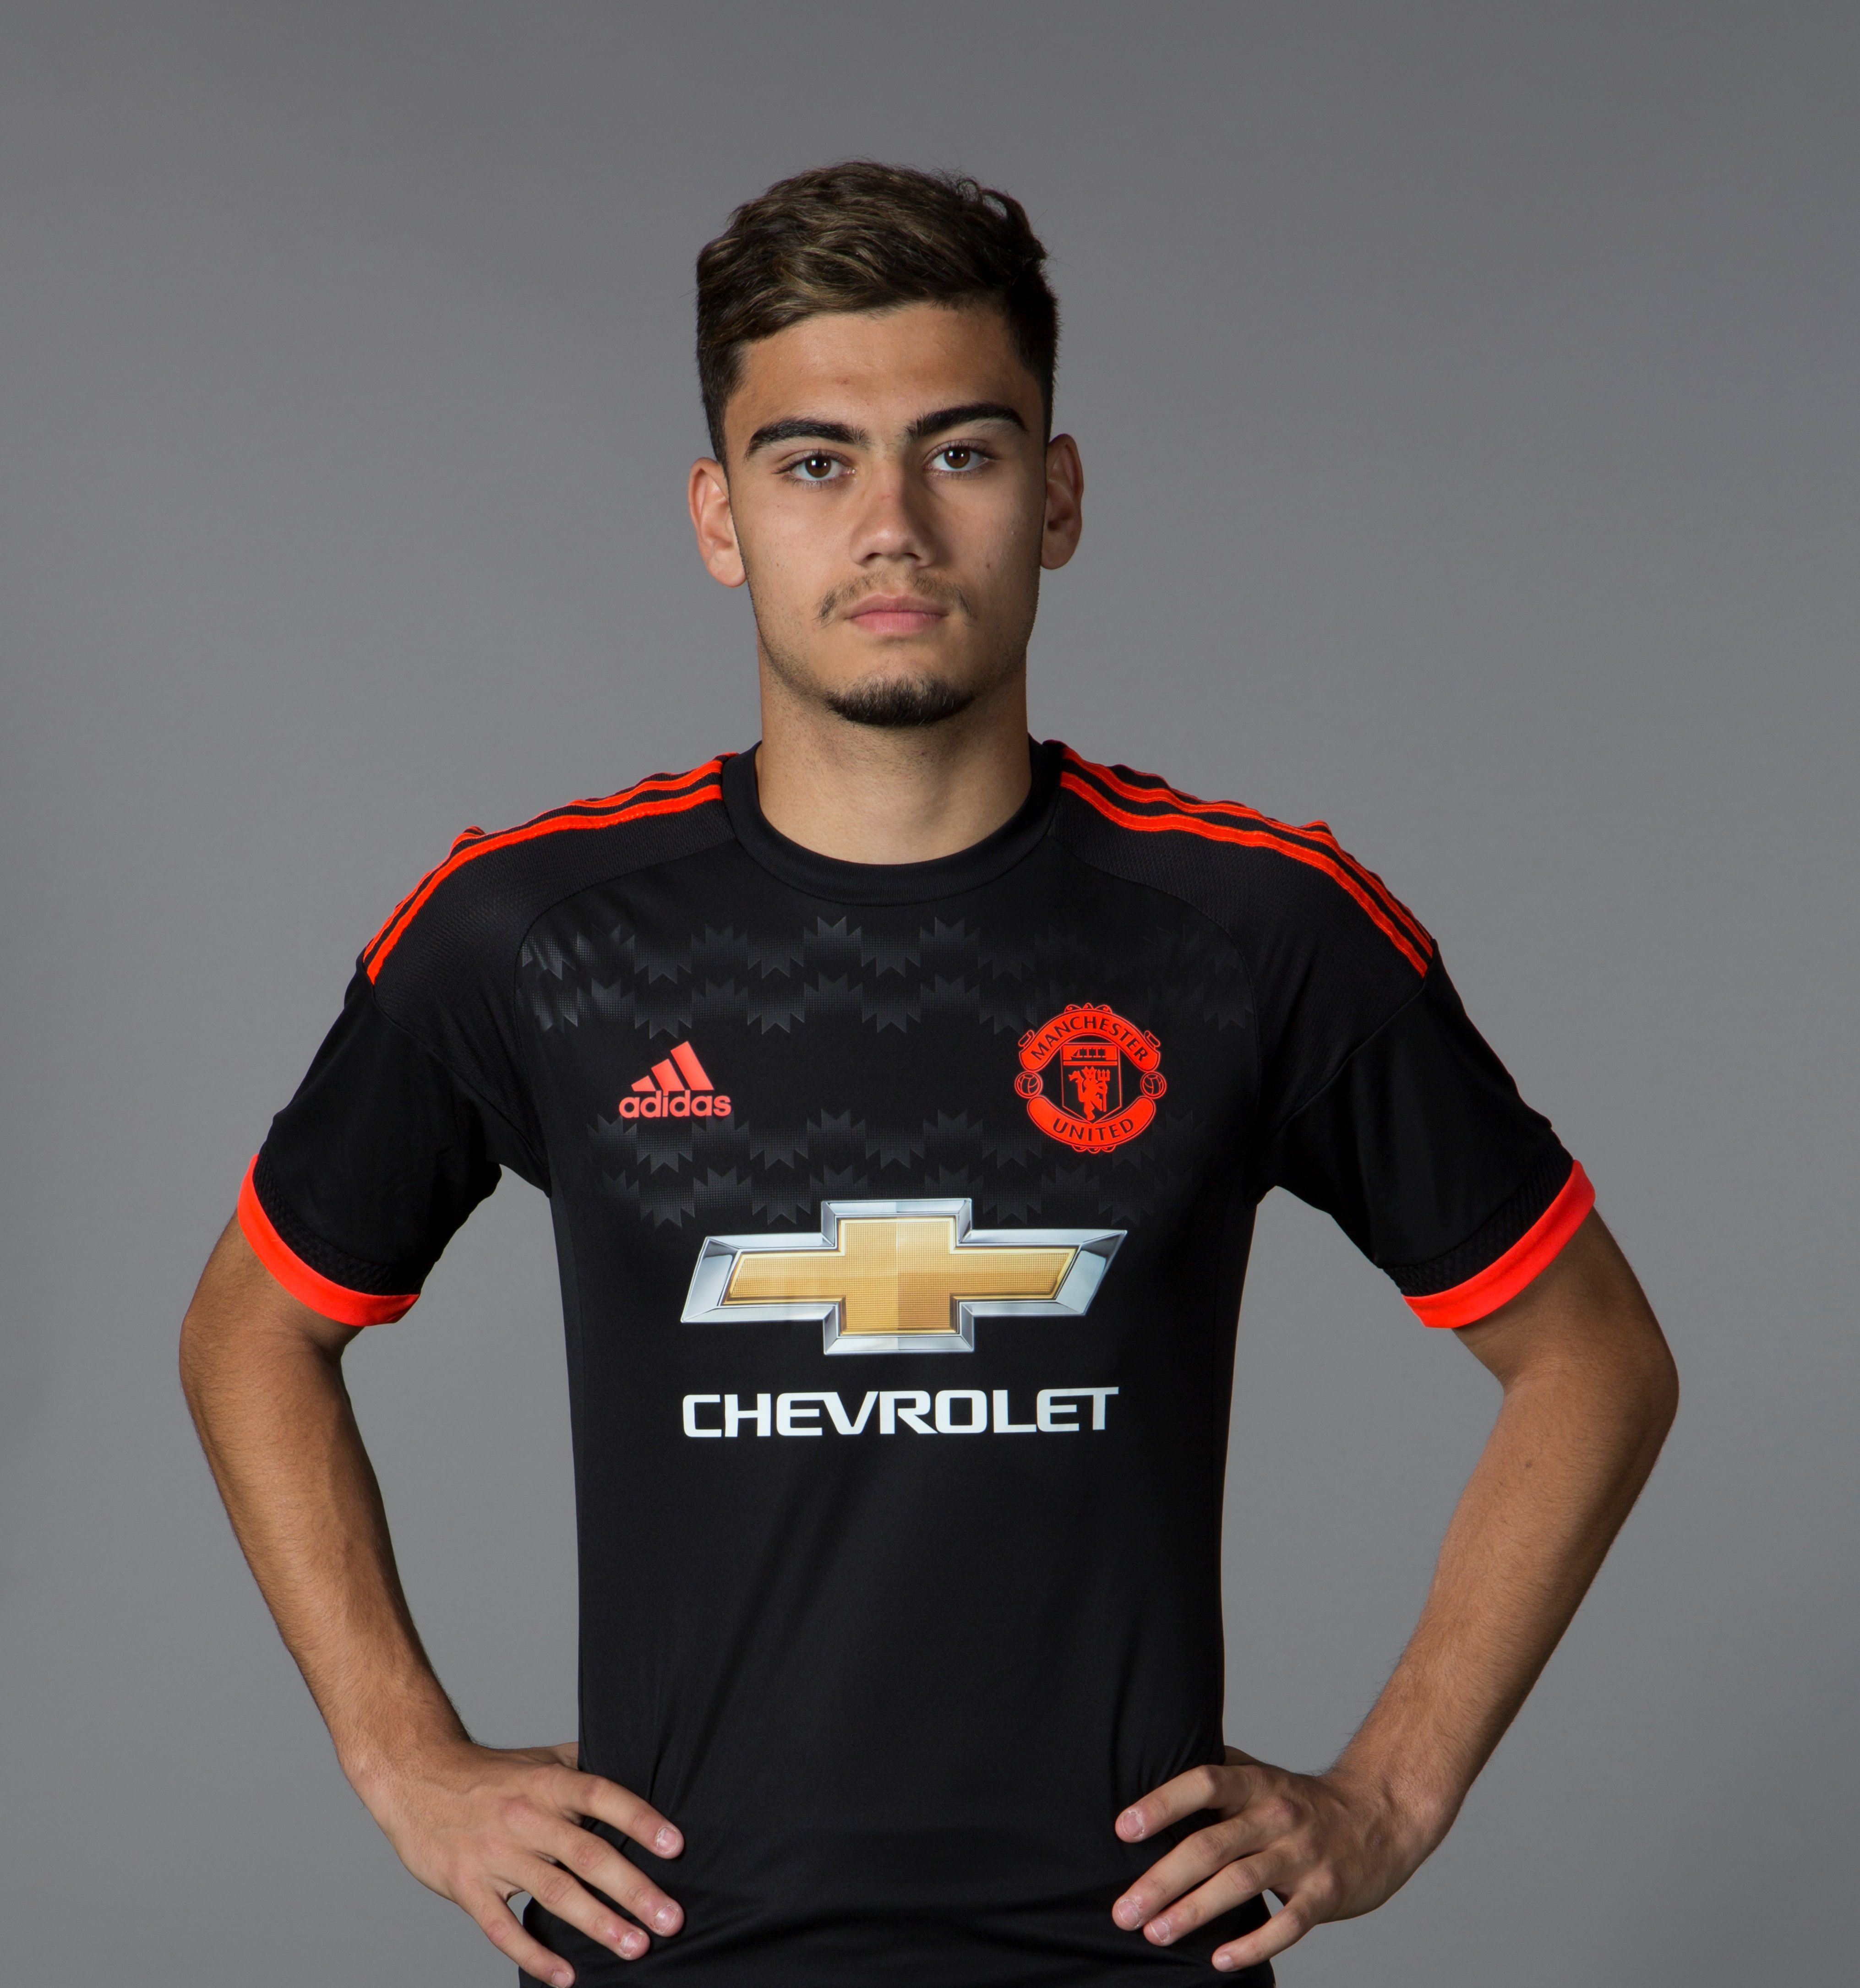 Go for short sides and volume on top like Andreas Pereira